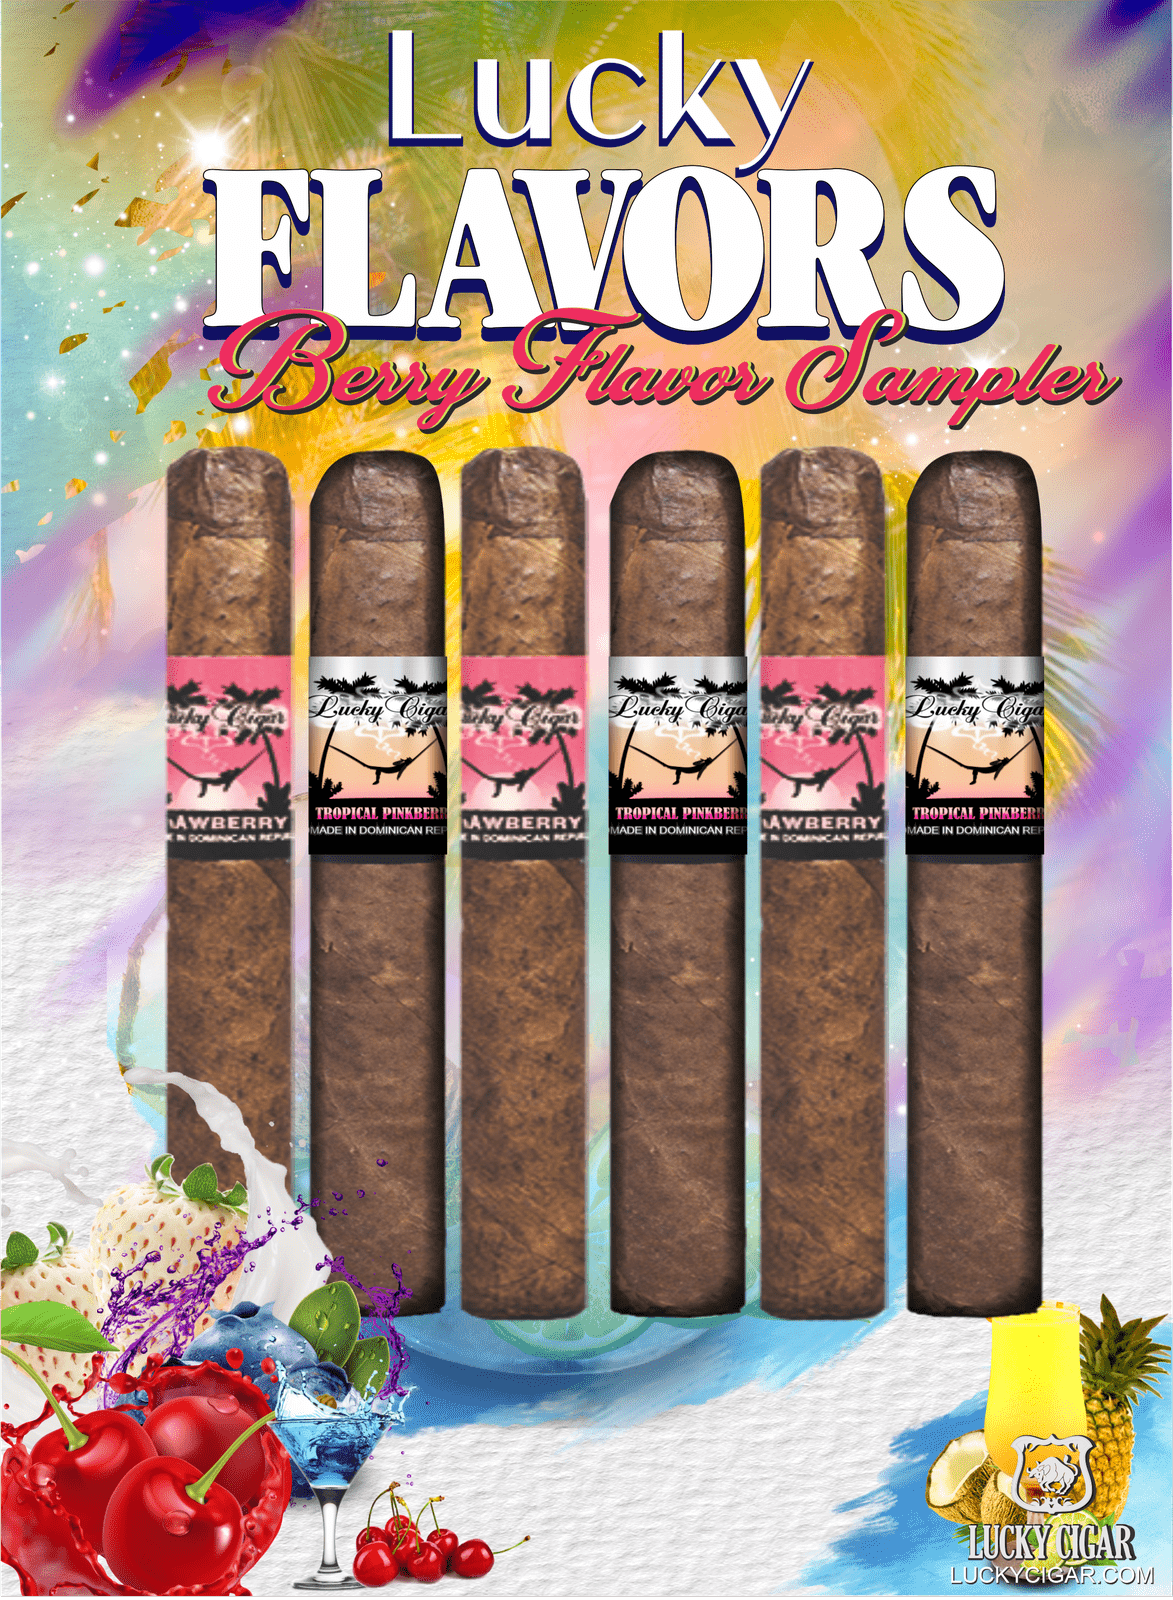 Flavored Cigars: Lucky Flavors 6 Piece Berry Fruit Sampler - Strawberry, Tropical Pinkberry 3 Tropical Pinkberry 5x42 Cigars 3 Strawberry 5x42 Cigars